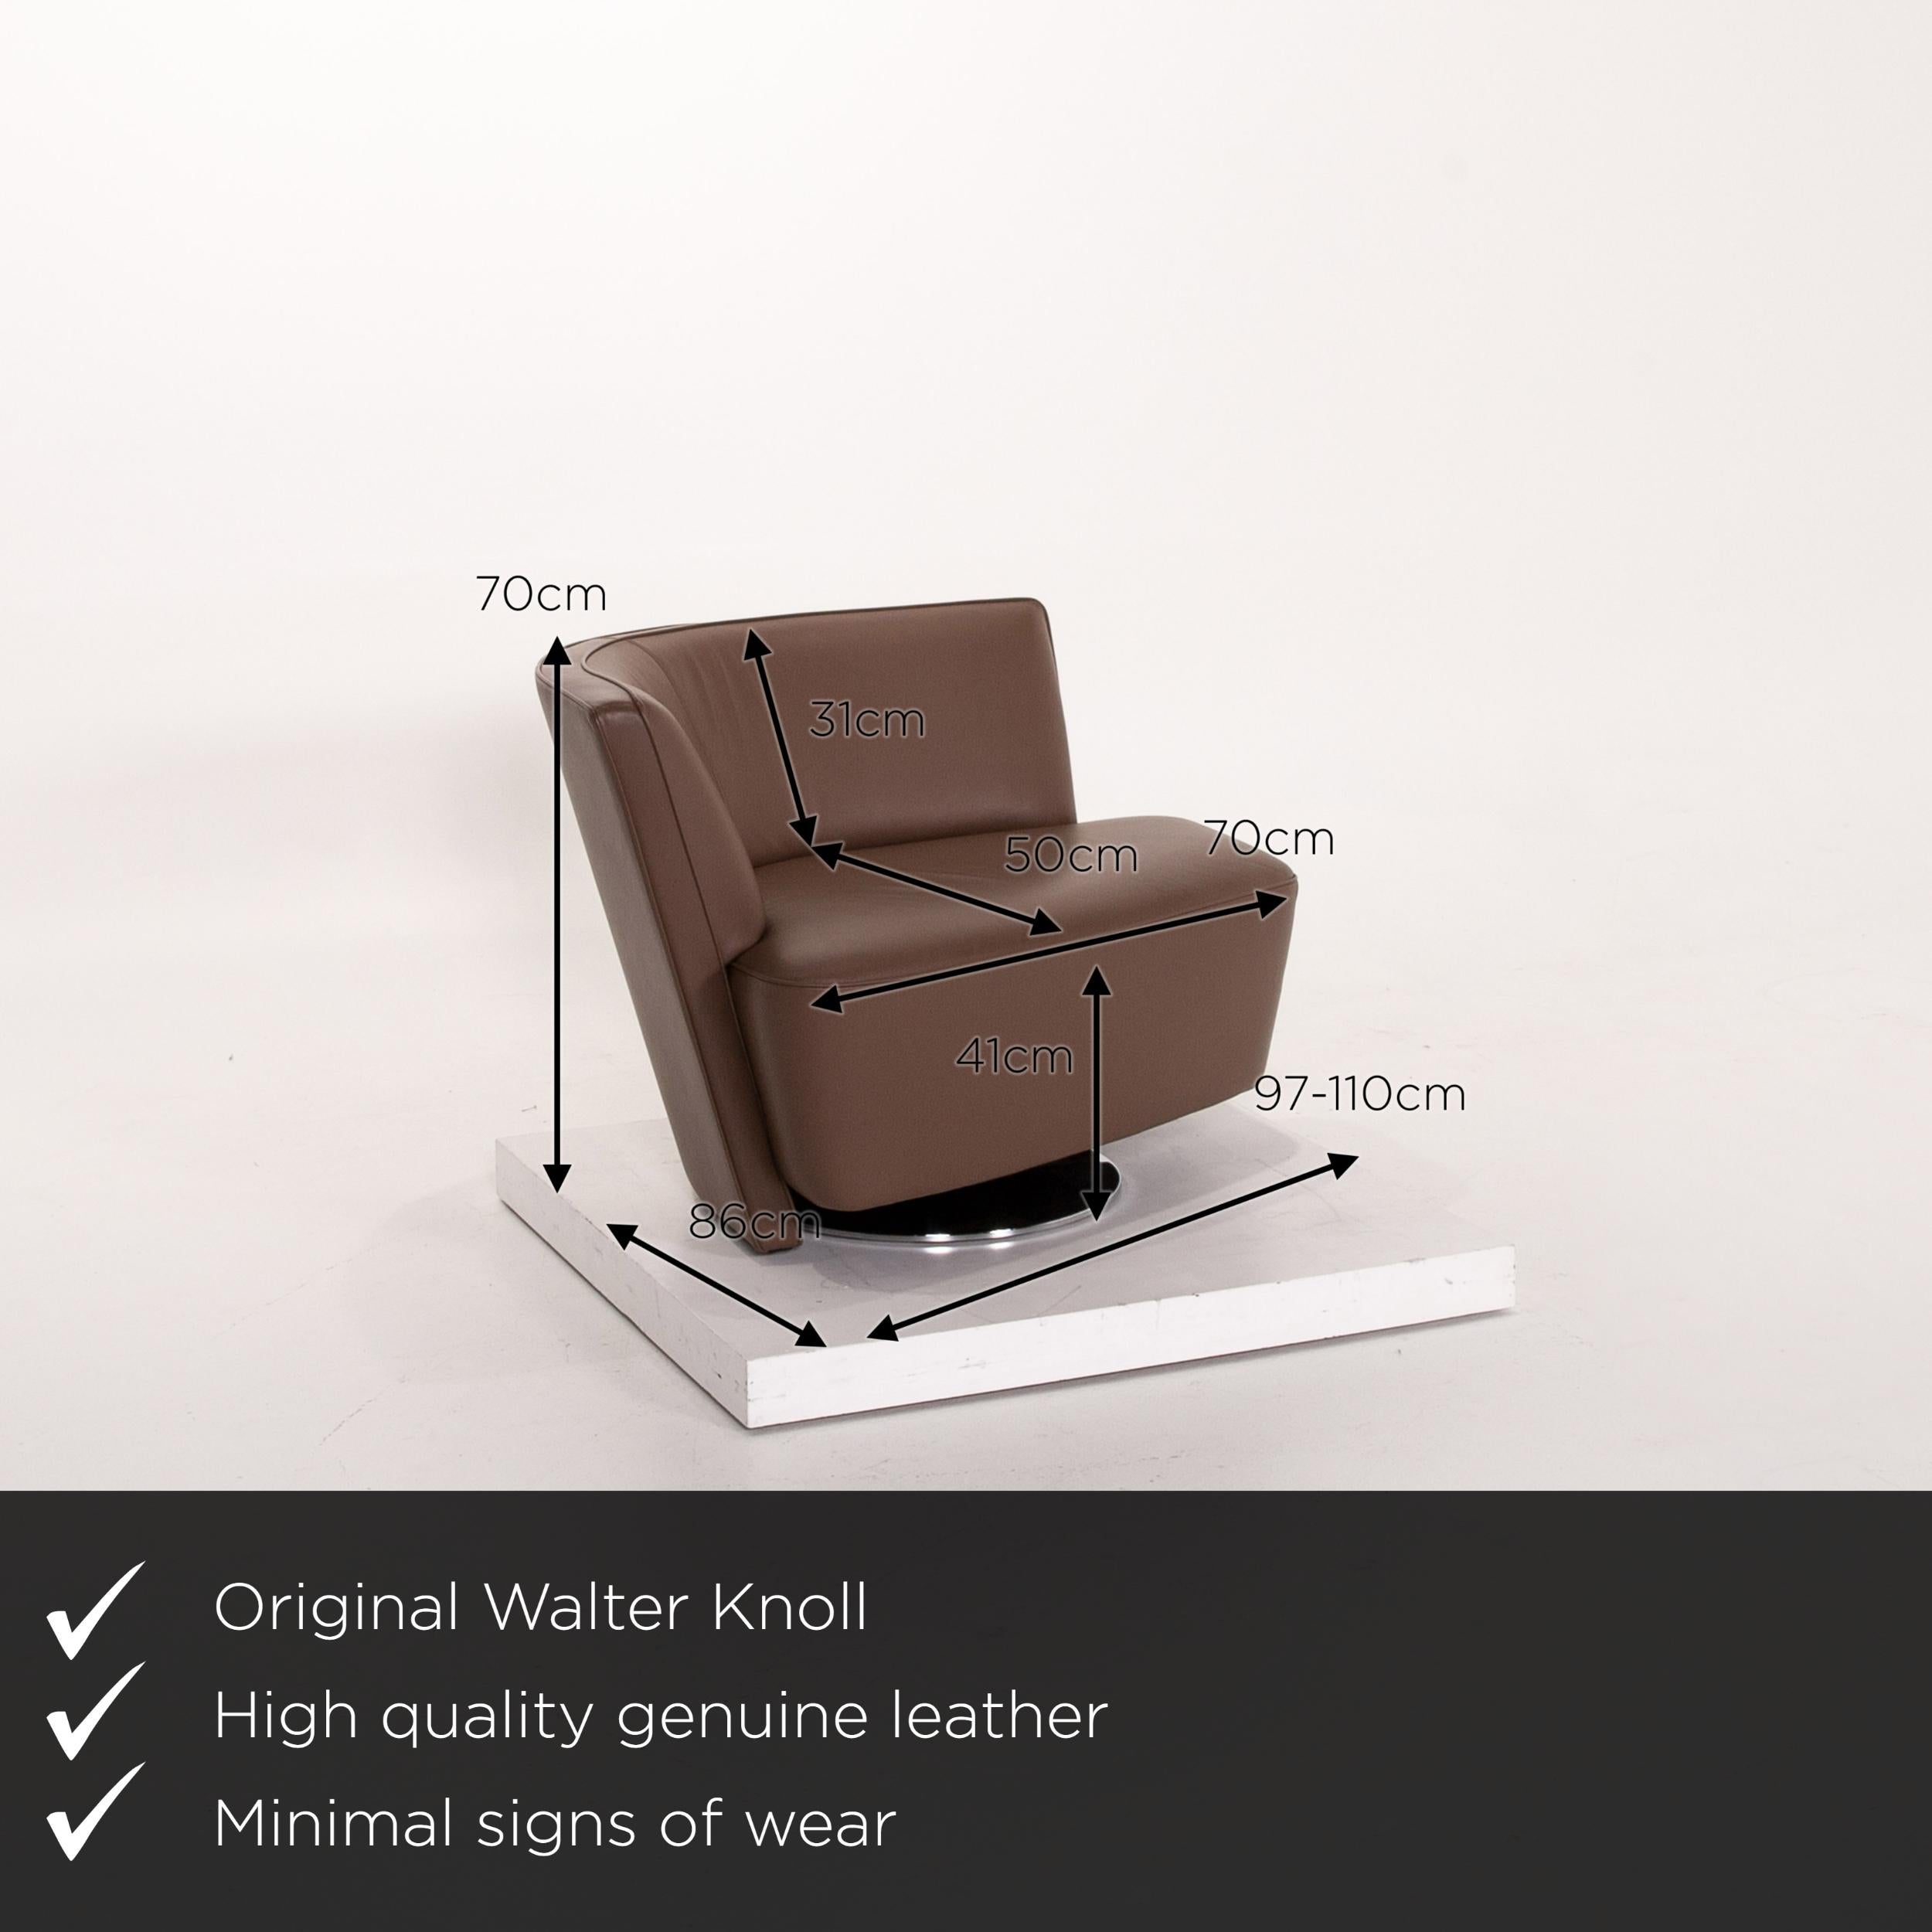 We present to you a Walter Knoll drift leather armchair set brown 1x armchair 1x stool.

Product measurements in centimeters:

Depth 86
Width 97
Height 70
Seat height 41
Rest height 30
Seat depth 50
Seat width 70
Back height